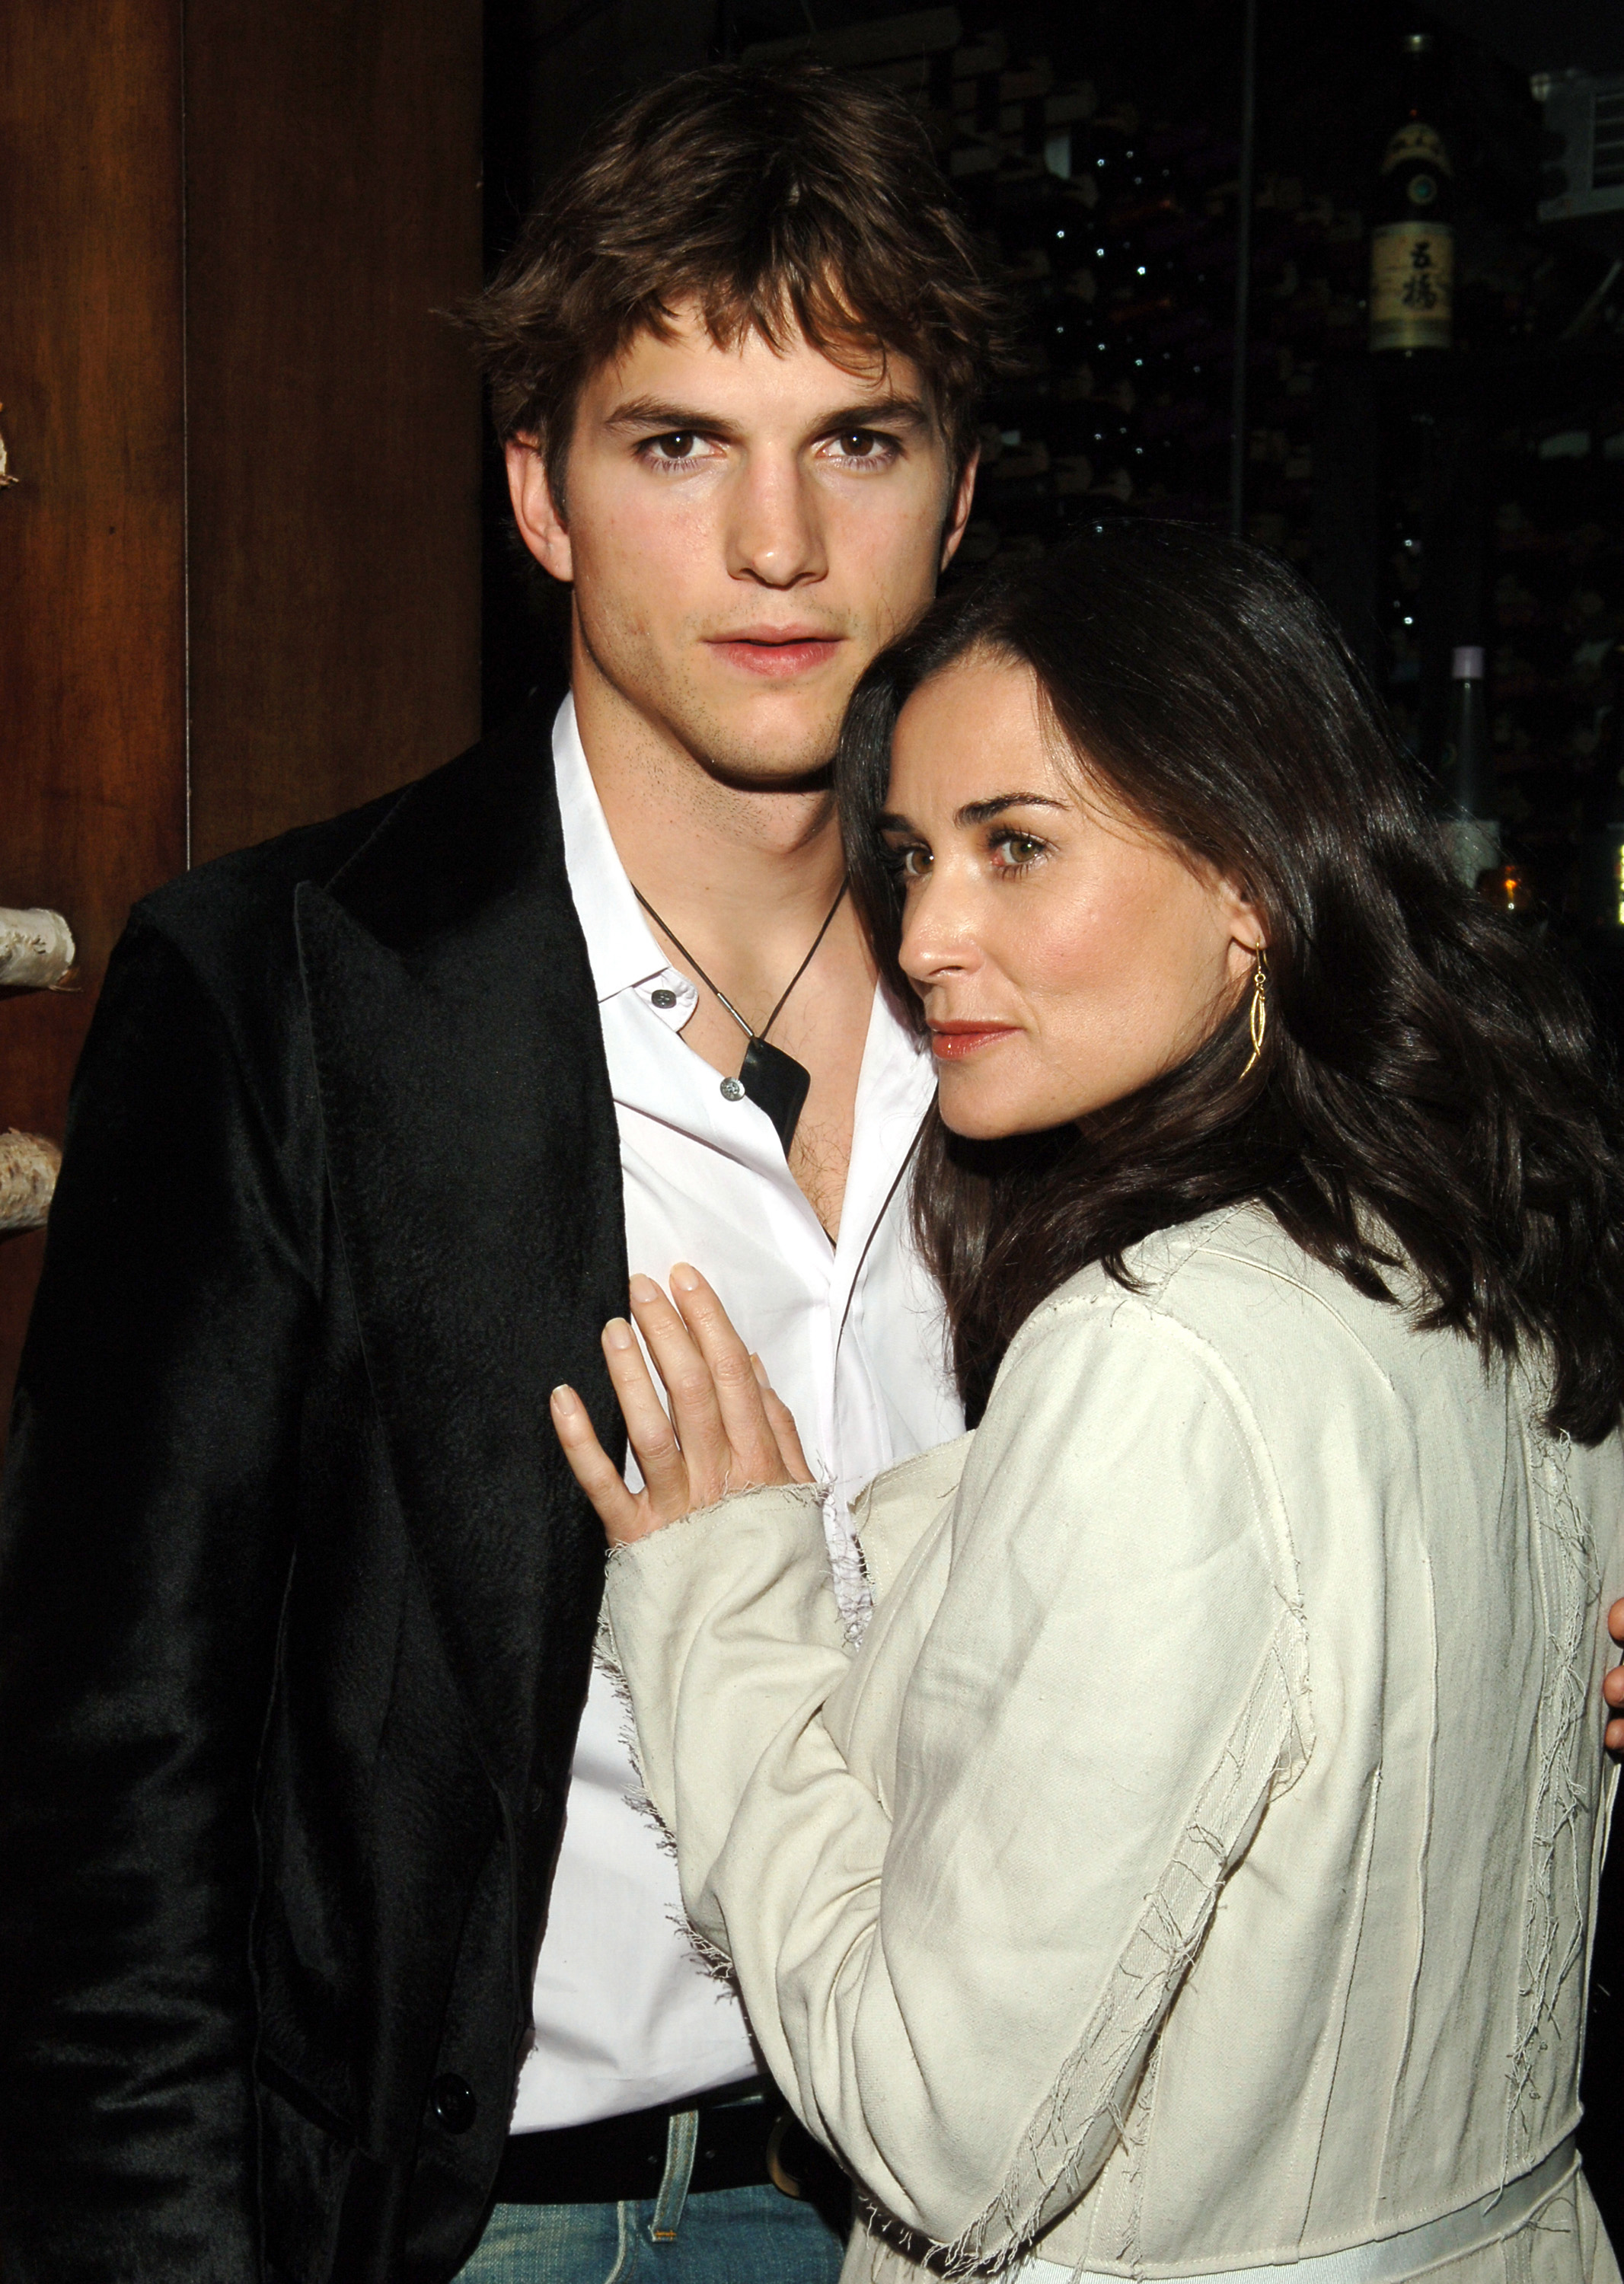 Ashton Kutcher and Demi Moore during the "Guess Who" Los Angeles premiere after party in Hollywood, California, on March 13, 2005 | Source: Getty Images